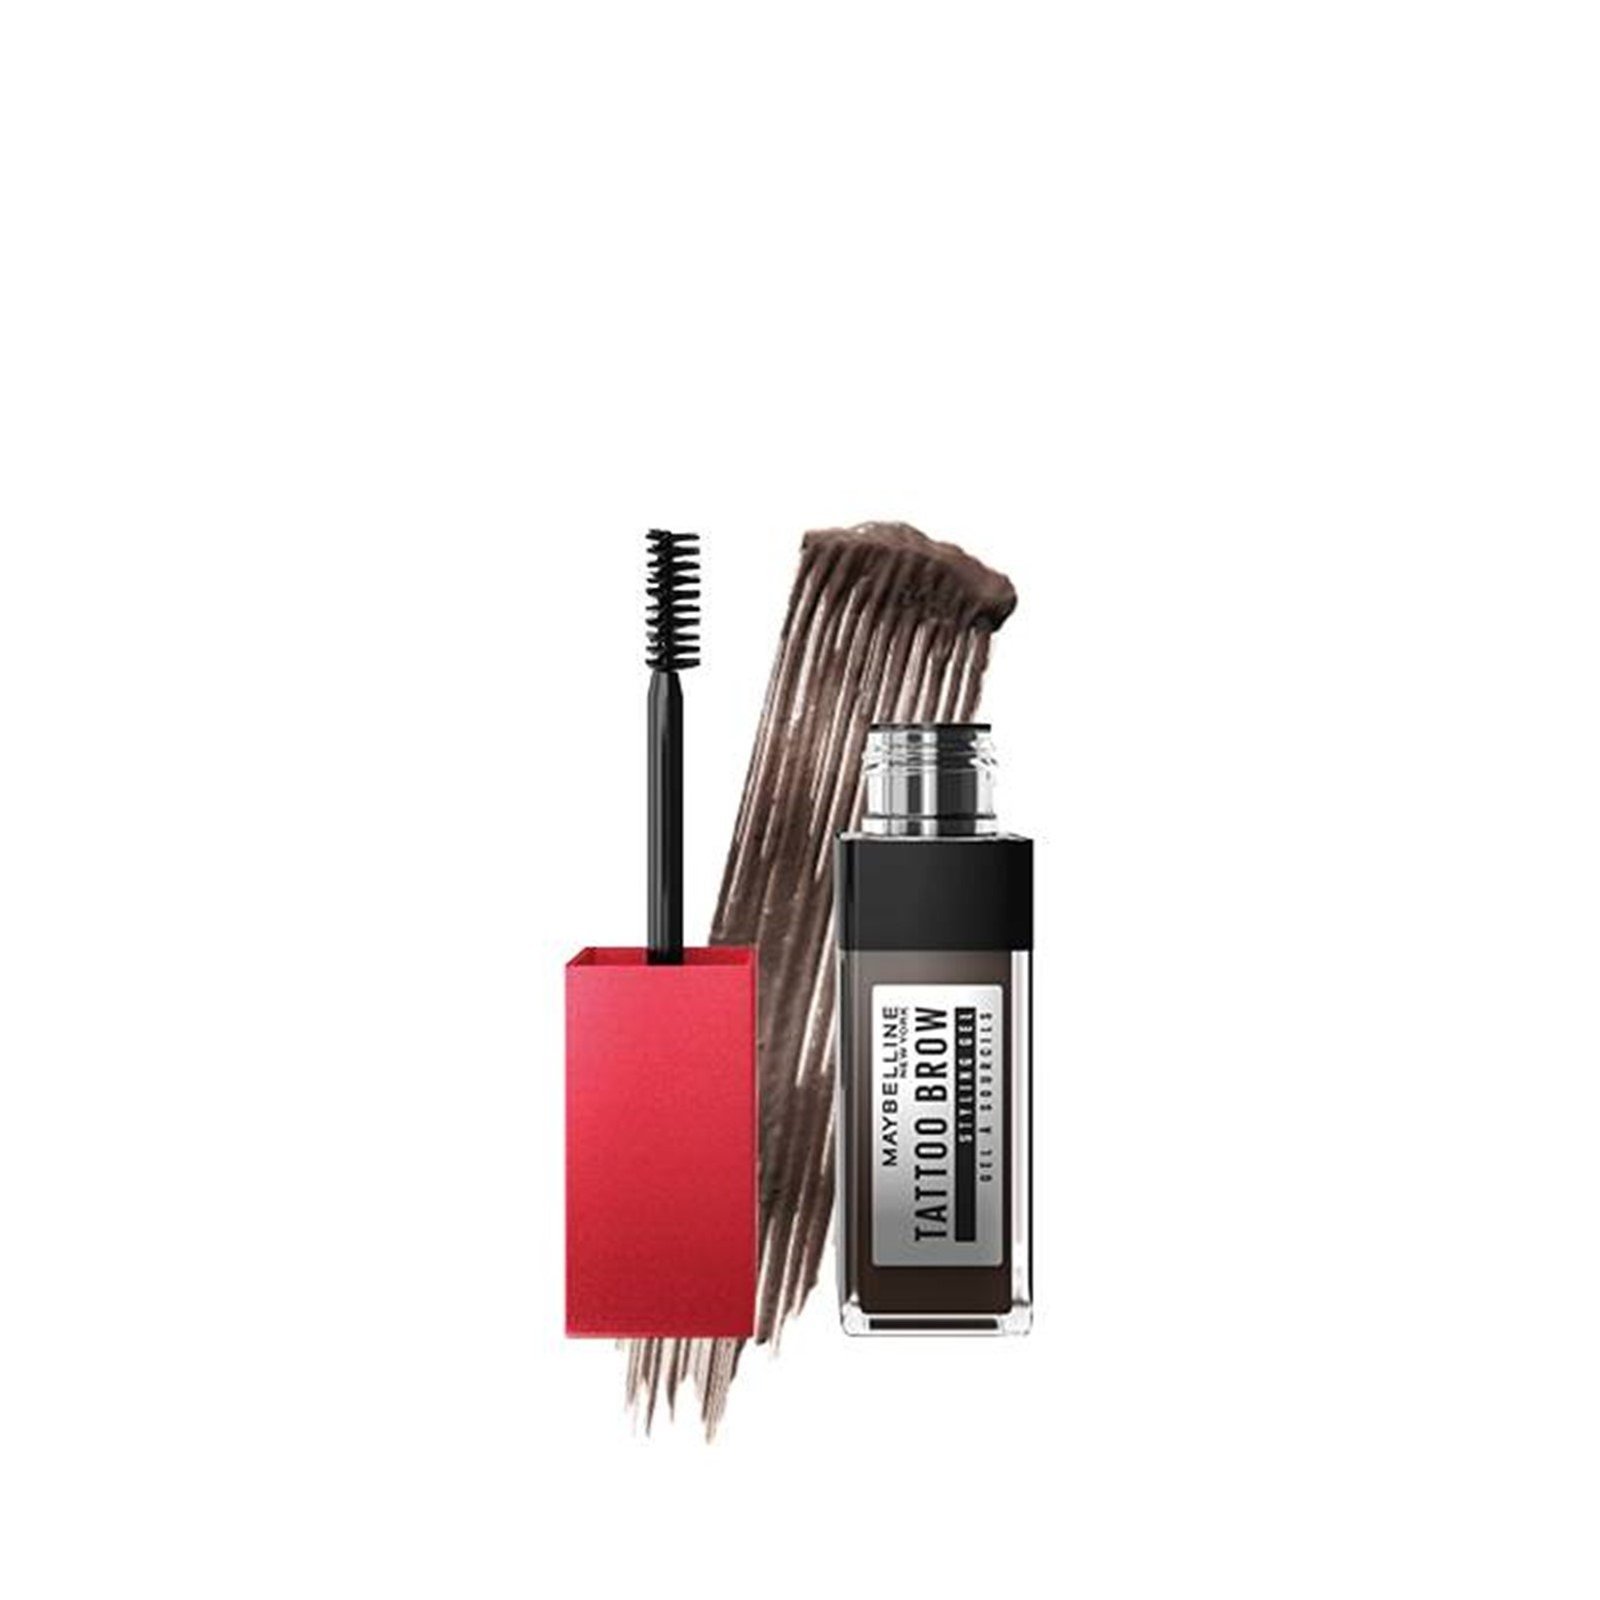 Maybelline Tattoo Brow 36h Styling Gel